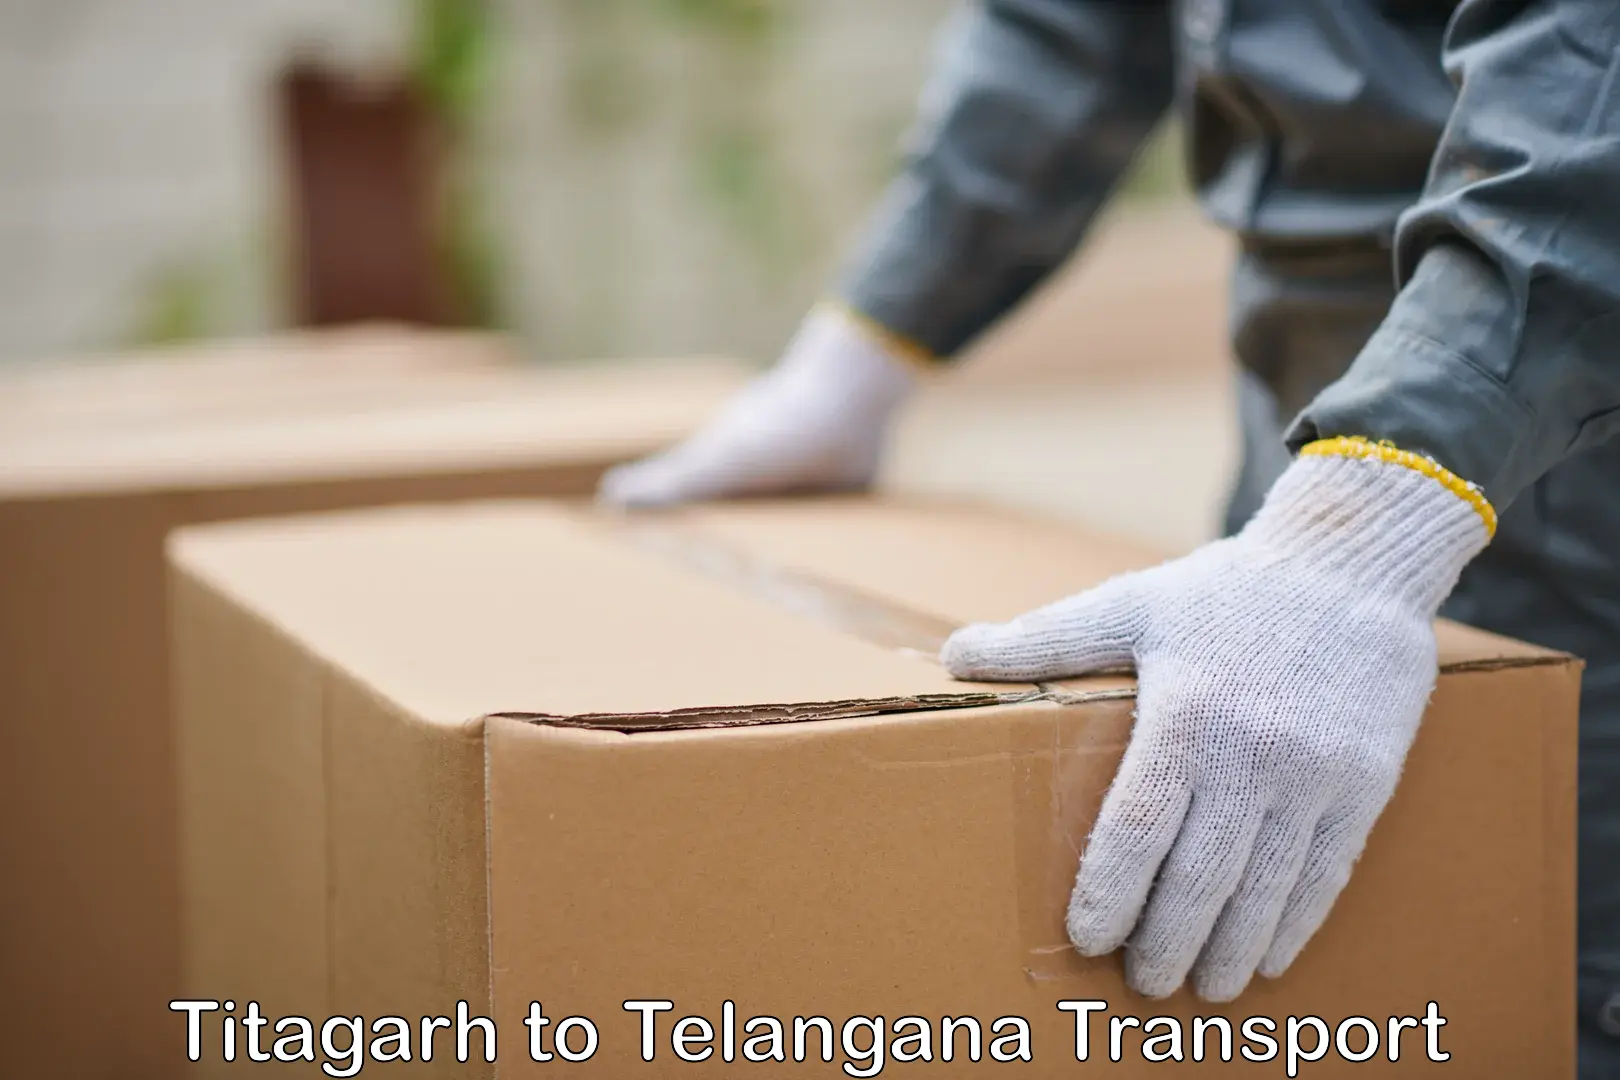 Container transport service Titagarh to Mancherial